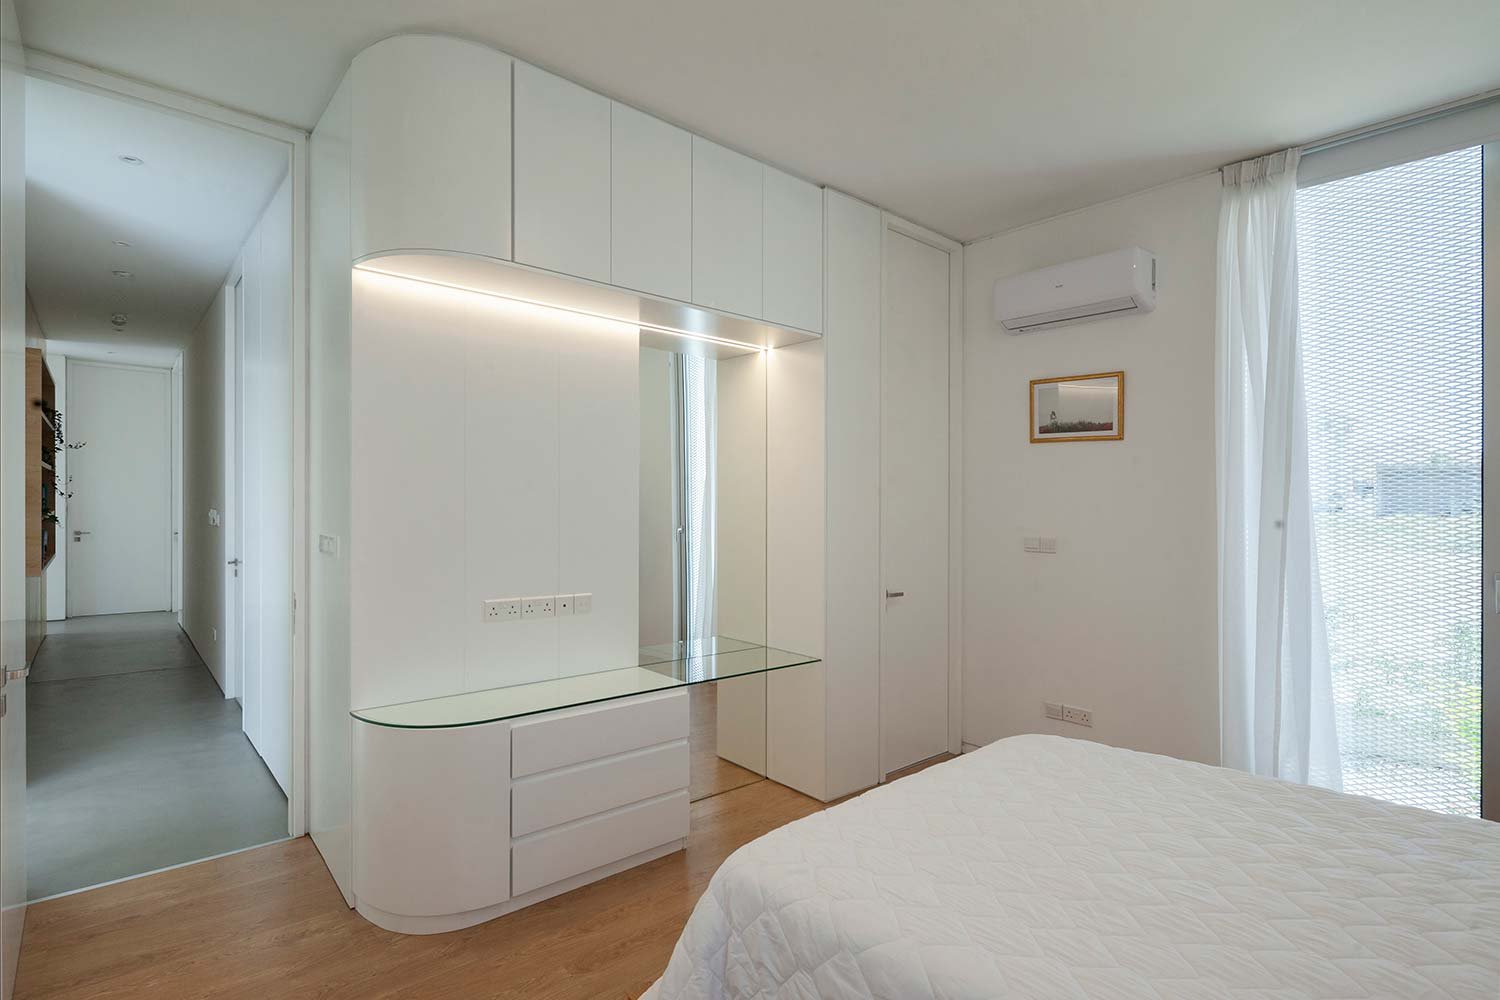 Wardrobe with curved corners and dressing table with transparent glass top